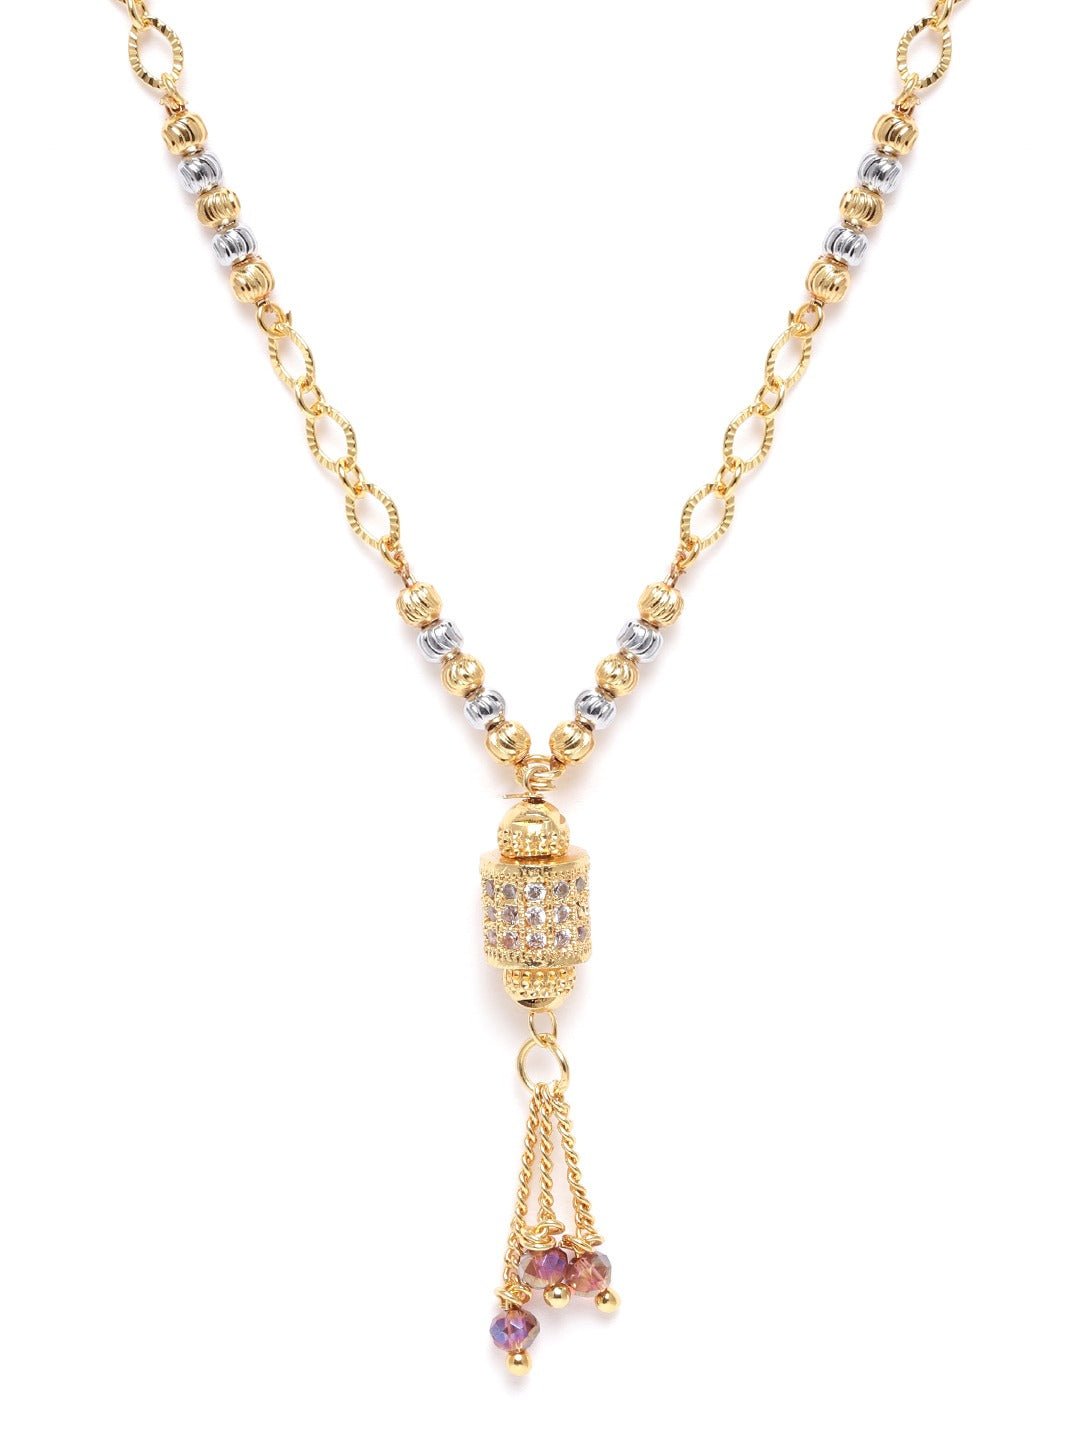 Silver-Toned Gold-Plated AD Studded Beaded Mangalsutra